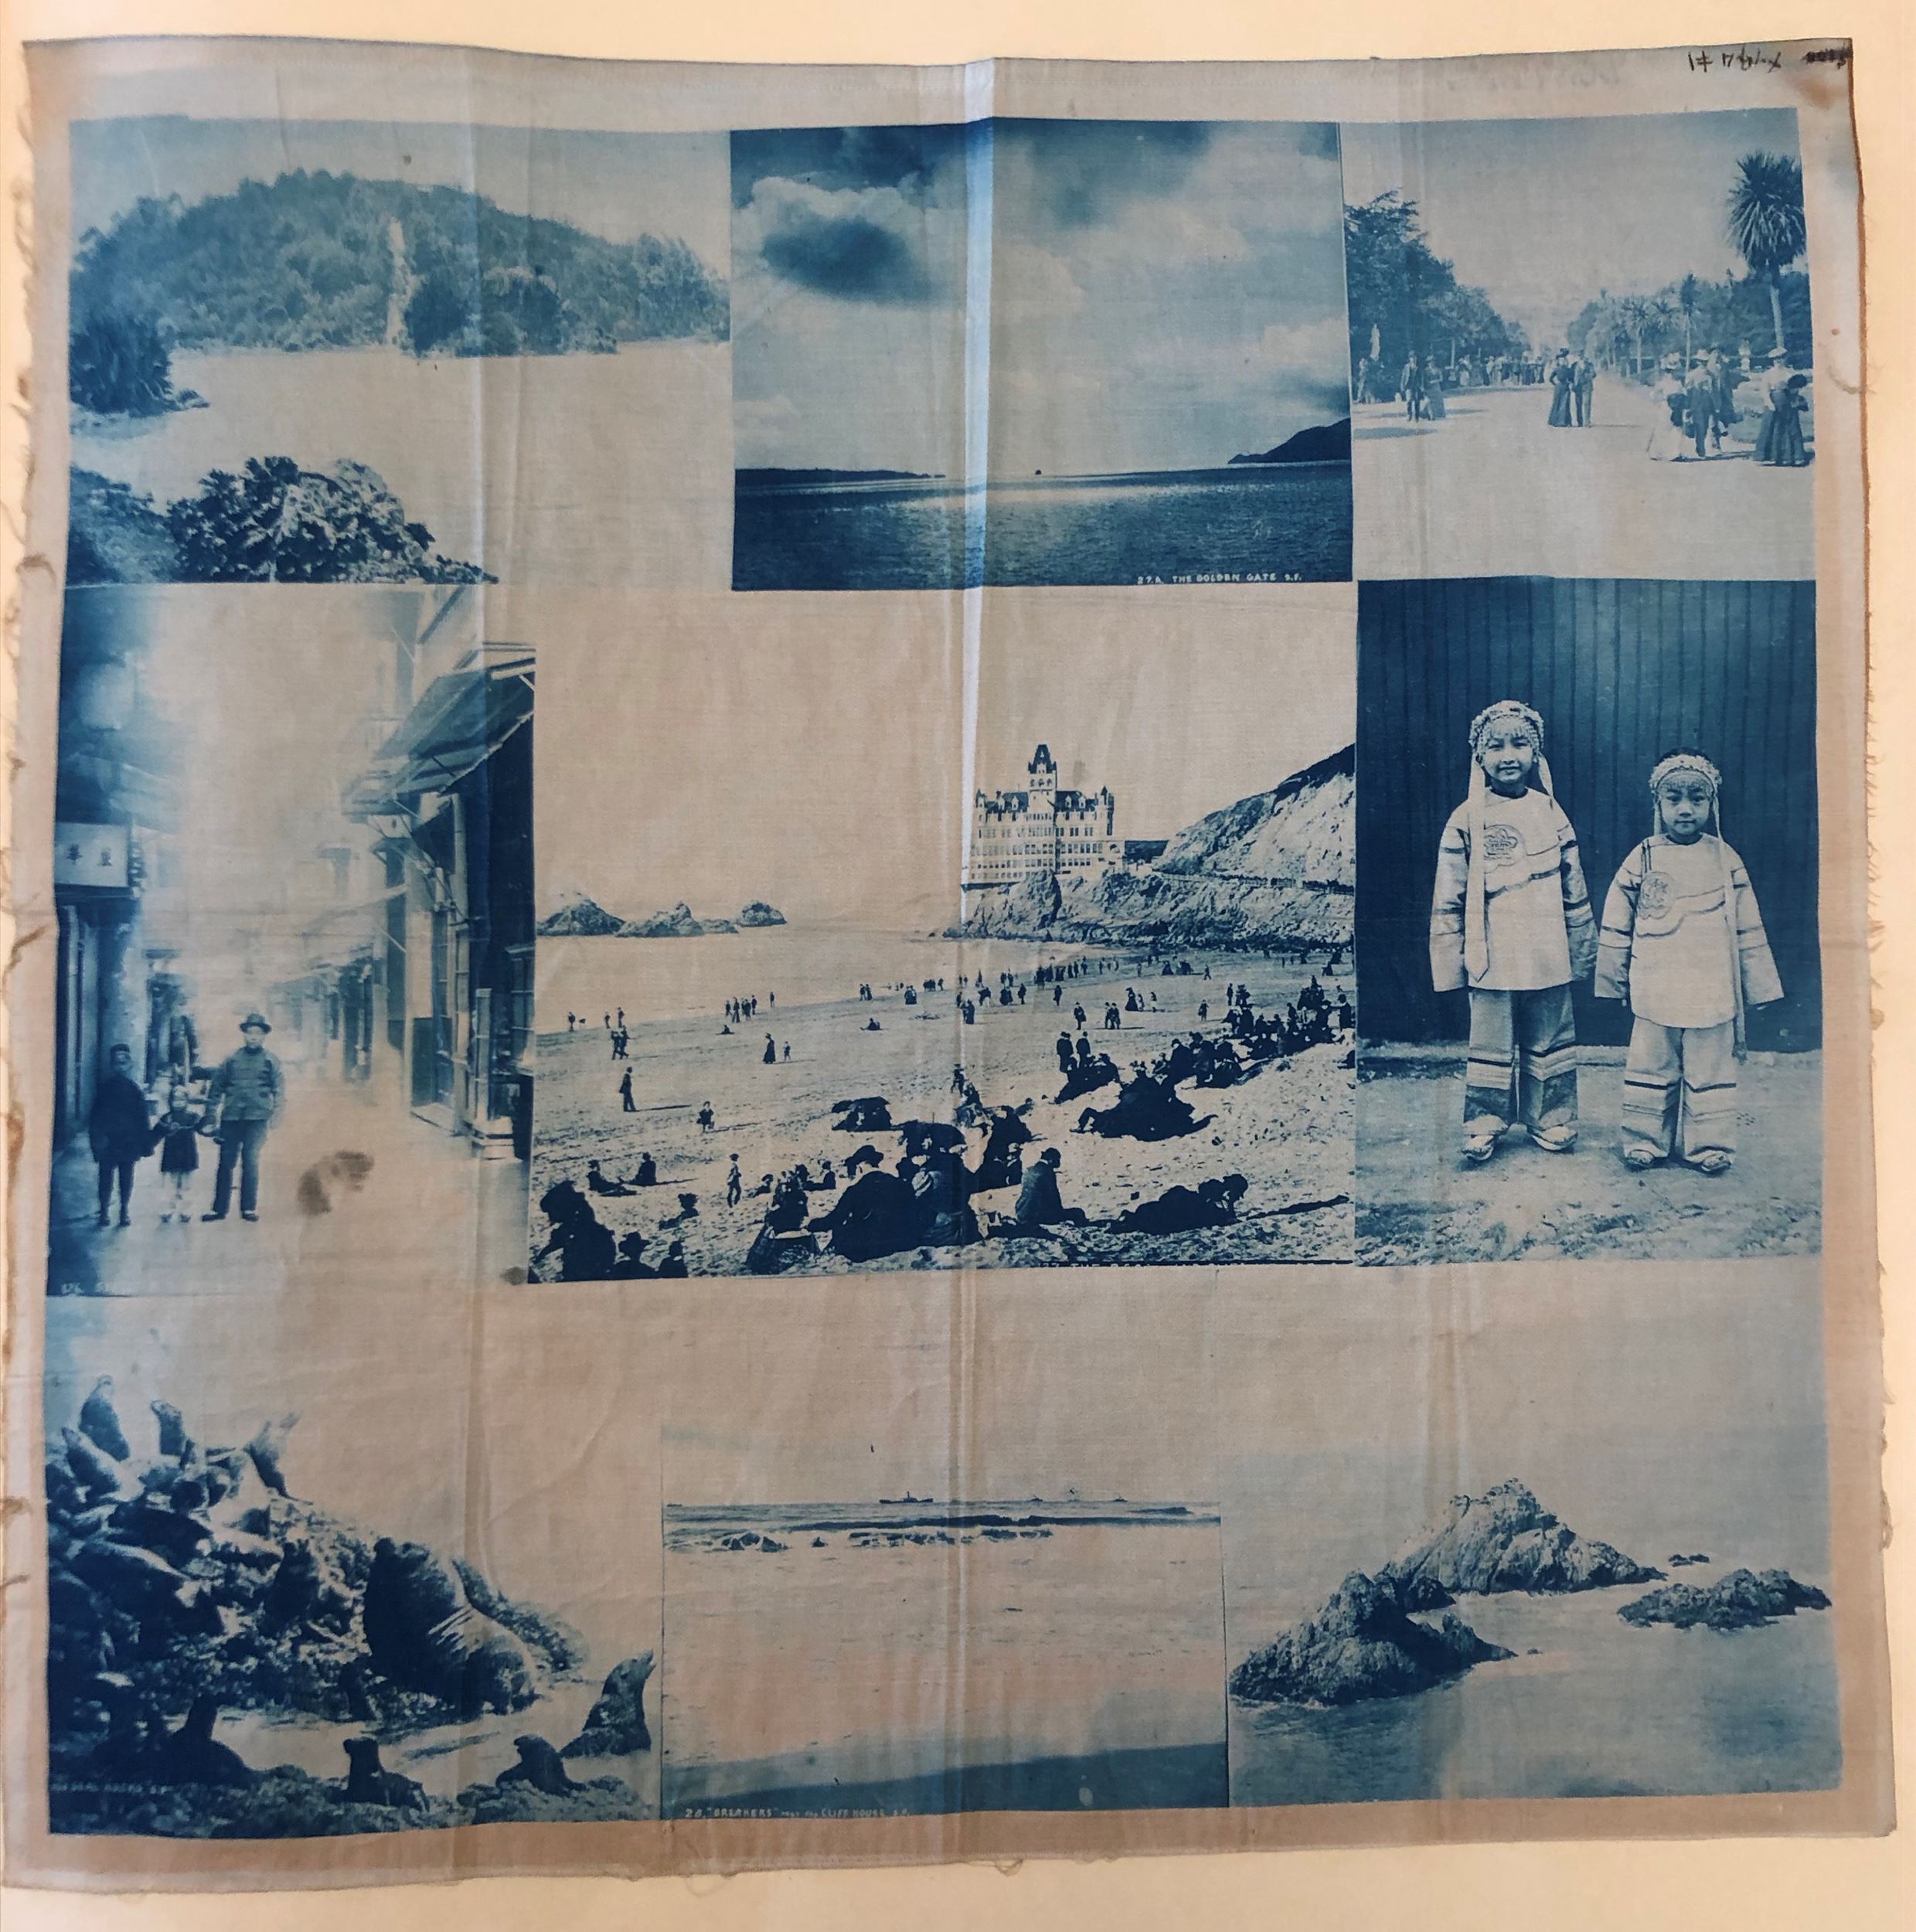 Square piece of fabric printed with nine different photographs in a blue tint. In the center is a view of people on a beach with a castle-like building beyond, flanked on either side by pictures of Asian American families.